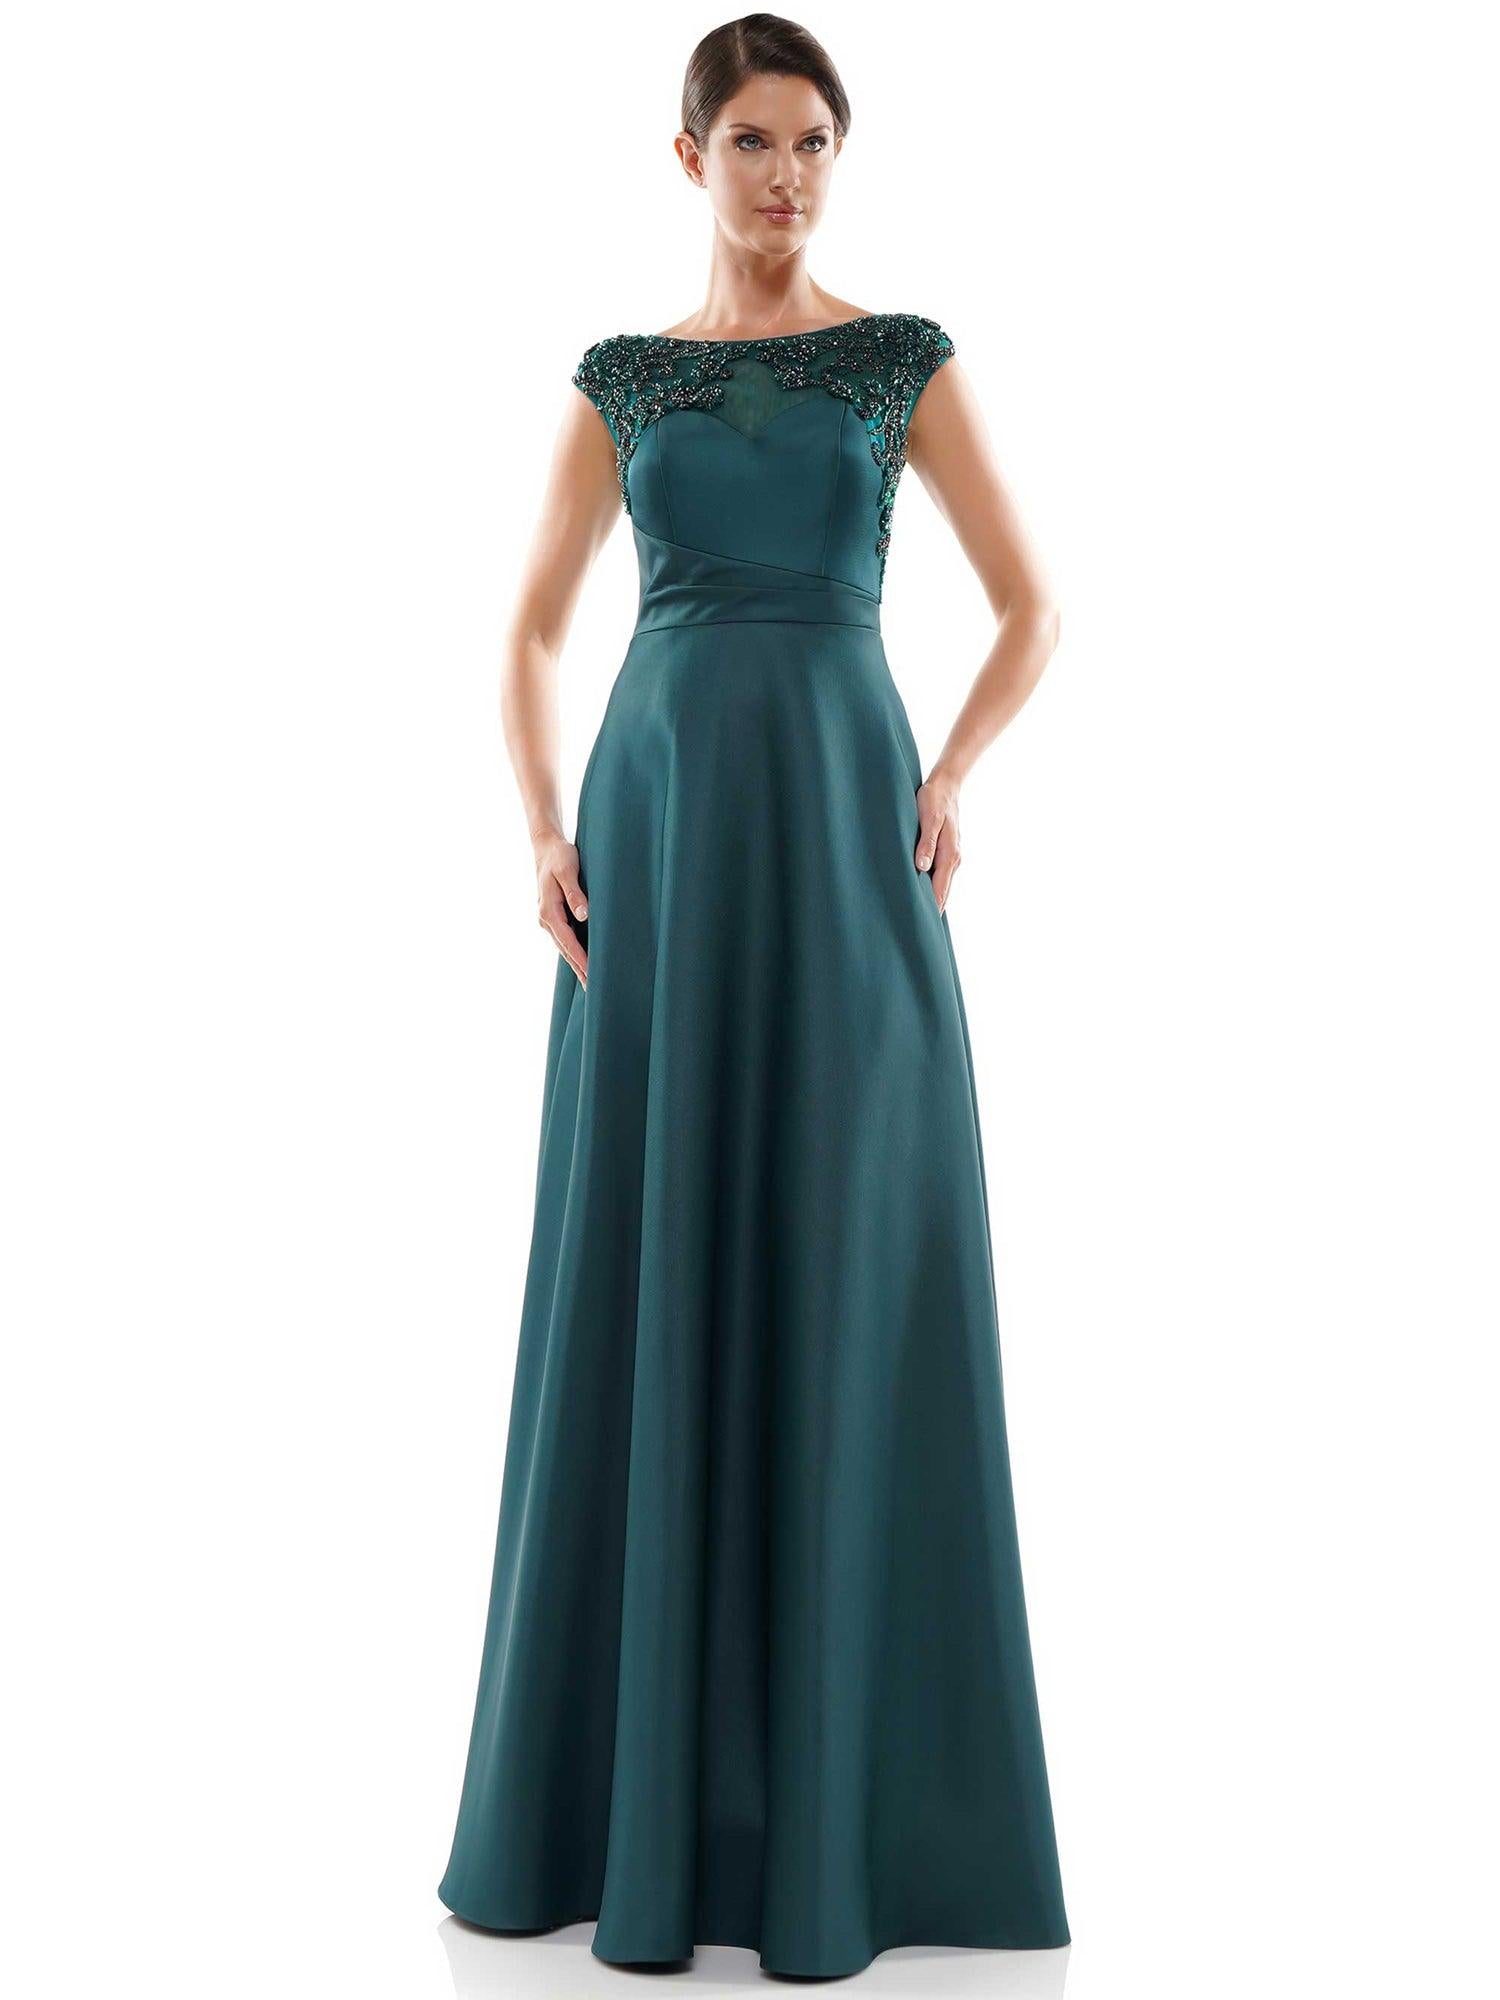 Marsoni Mother of the Bride A Line Long Dress 1005 - The Dress Outlet